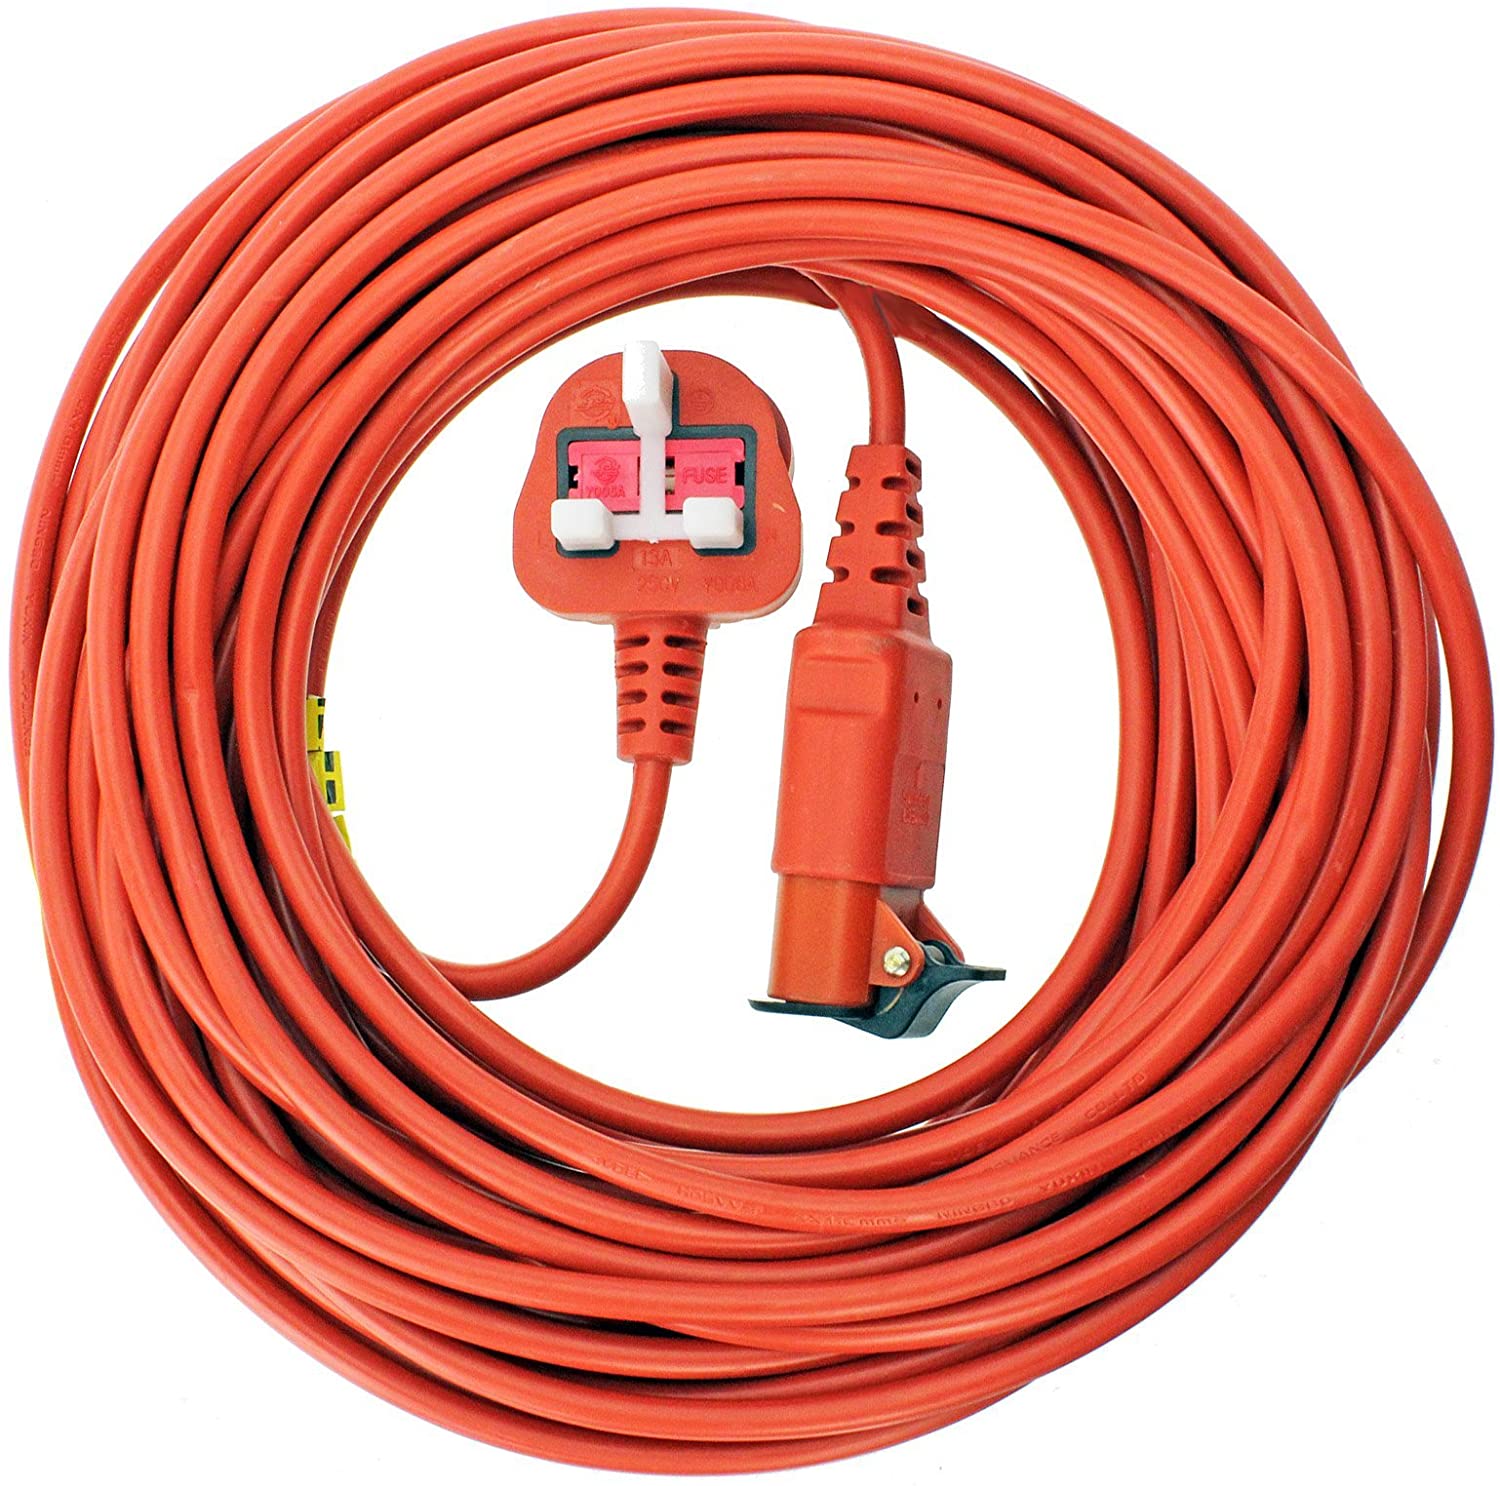 20 Metre Cable & Lead Plug for Flymo Lawnmower or Hedge Trimmer (20m)